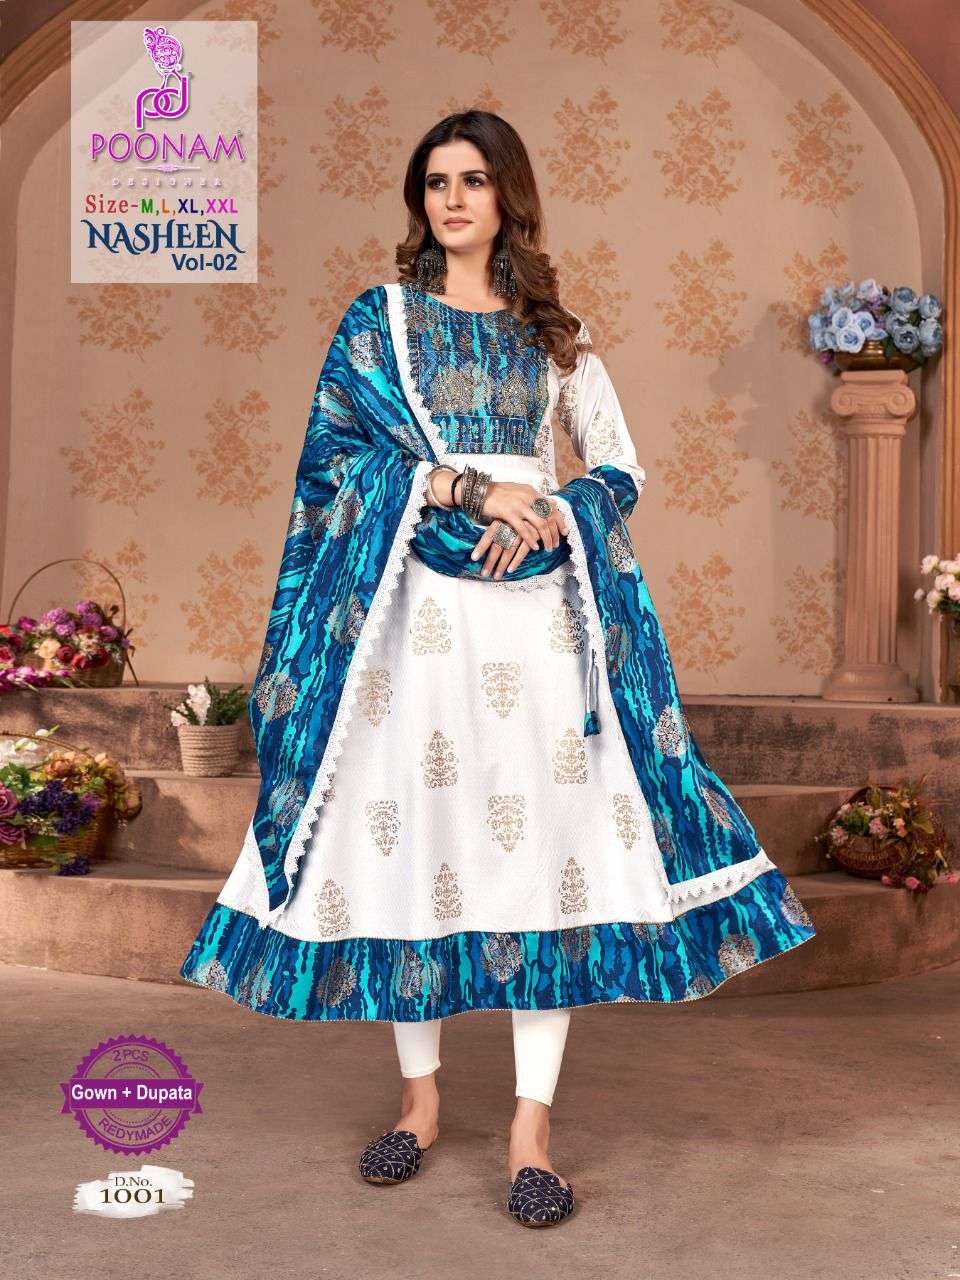 NASHEEN Vol-2 BY POONAM DESIGNER PRESENTING NEW FANCY GOWN WITH DUPATTA COLLECTION WHOLESALER